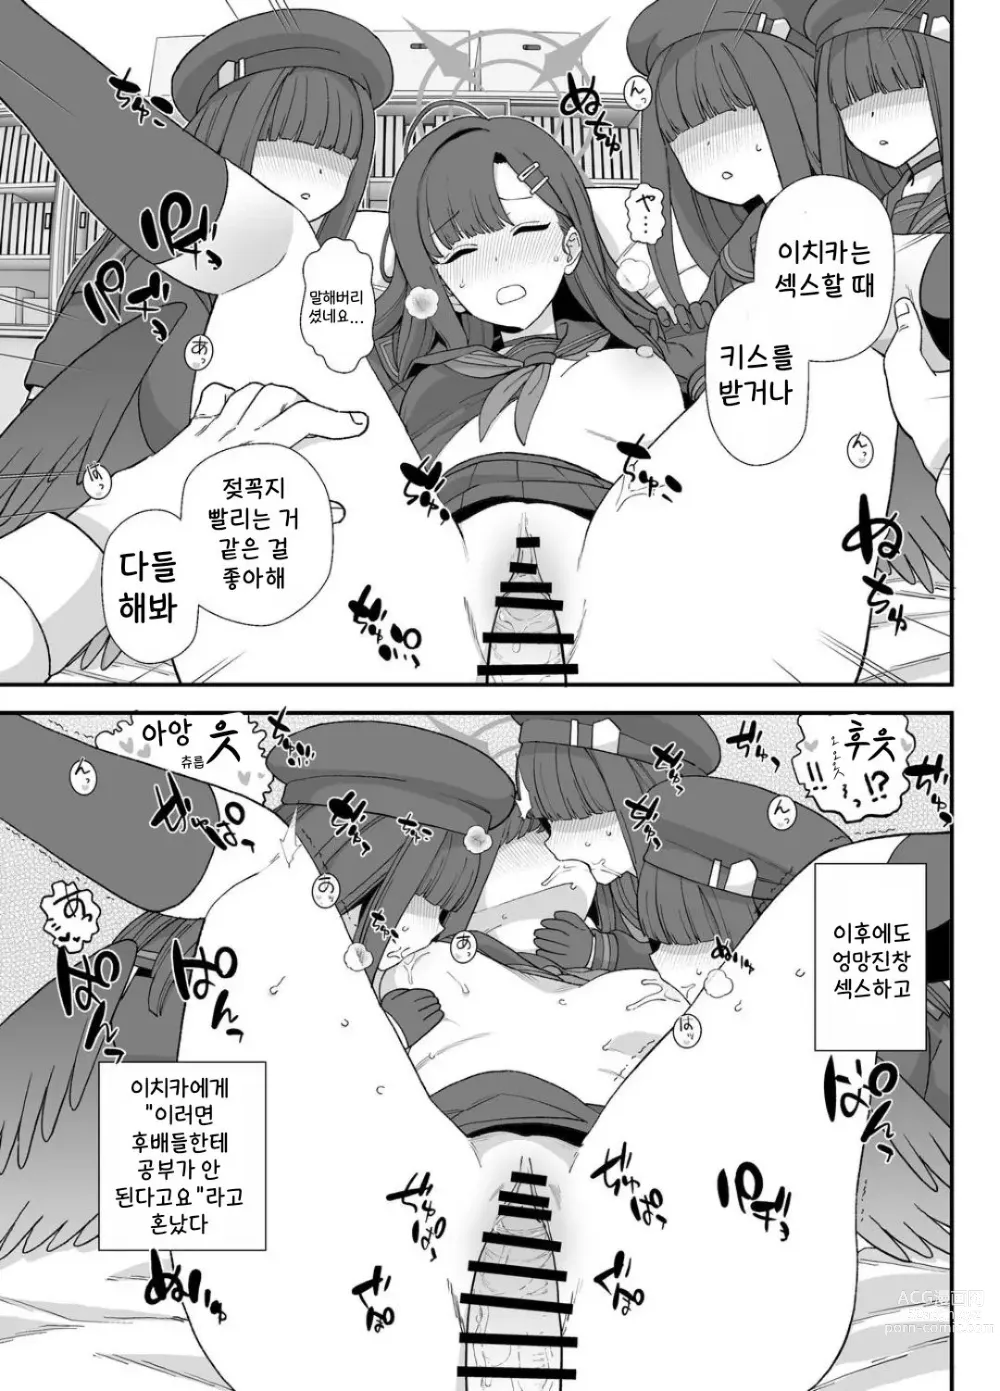 Page 8 of doujinshi 블루아카 이치카 섹스 만화